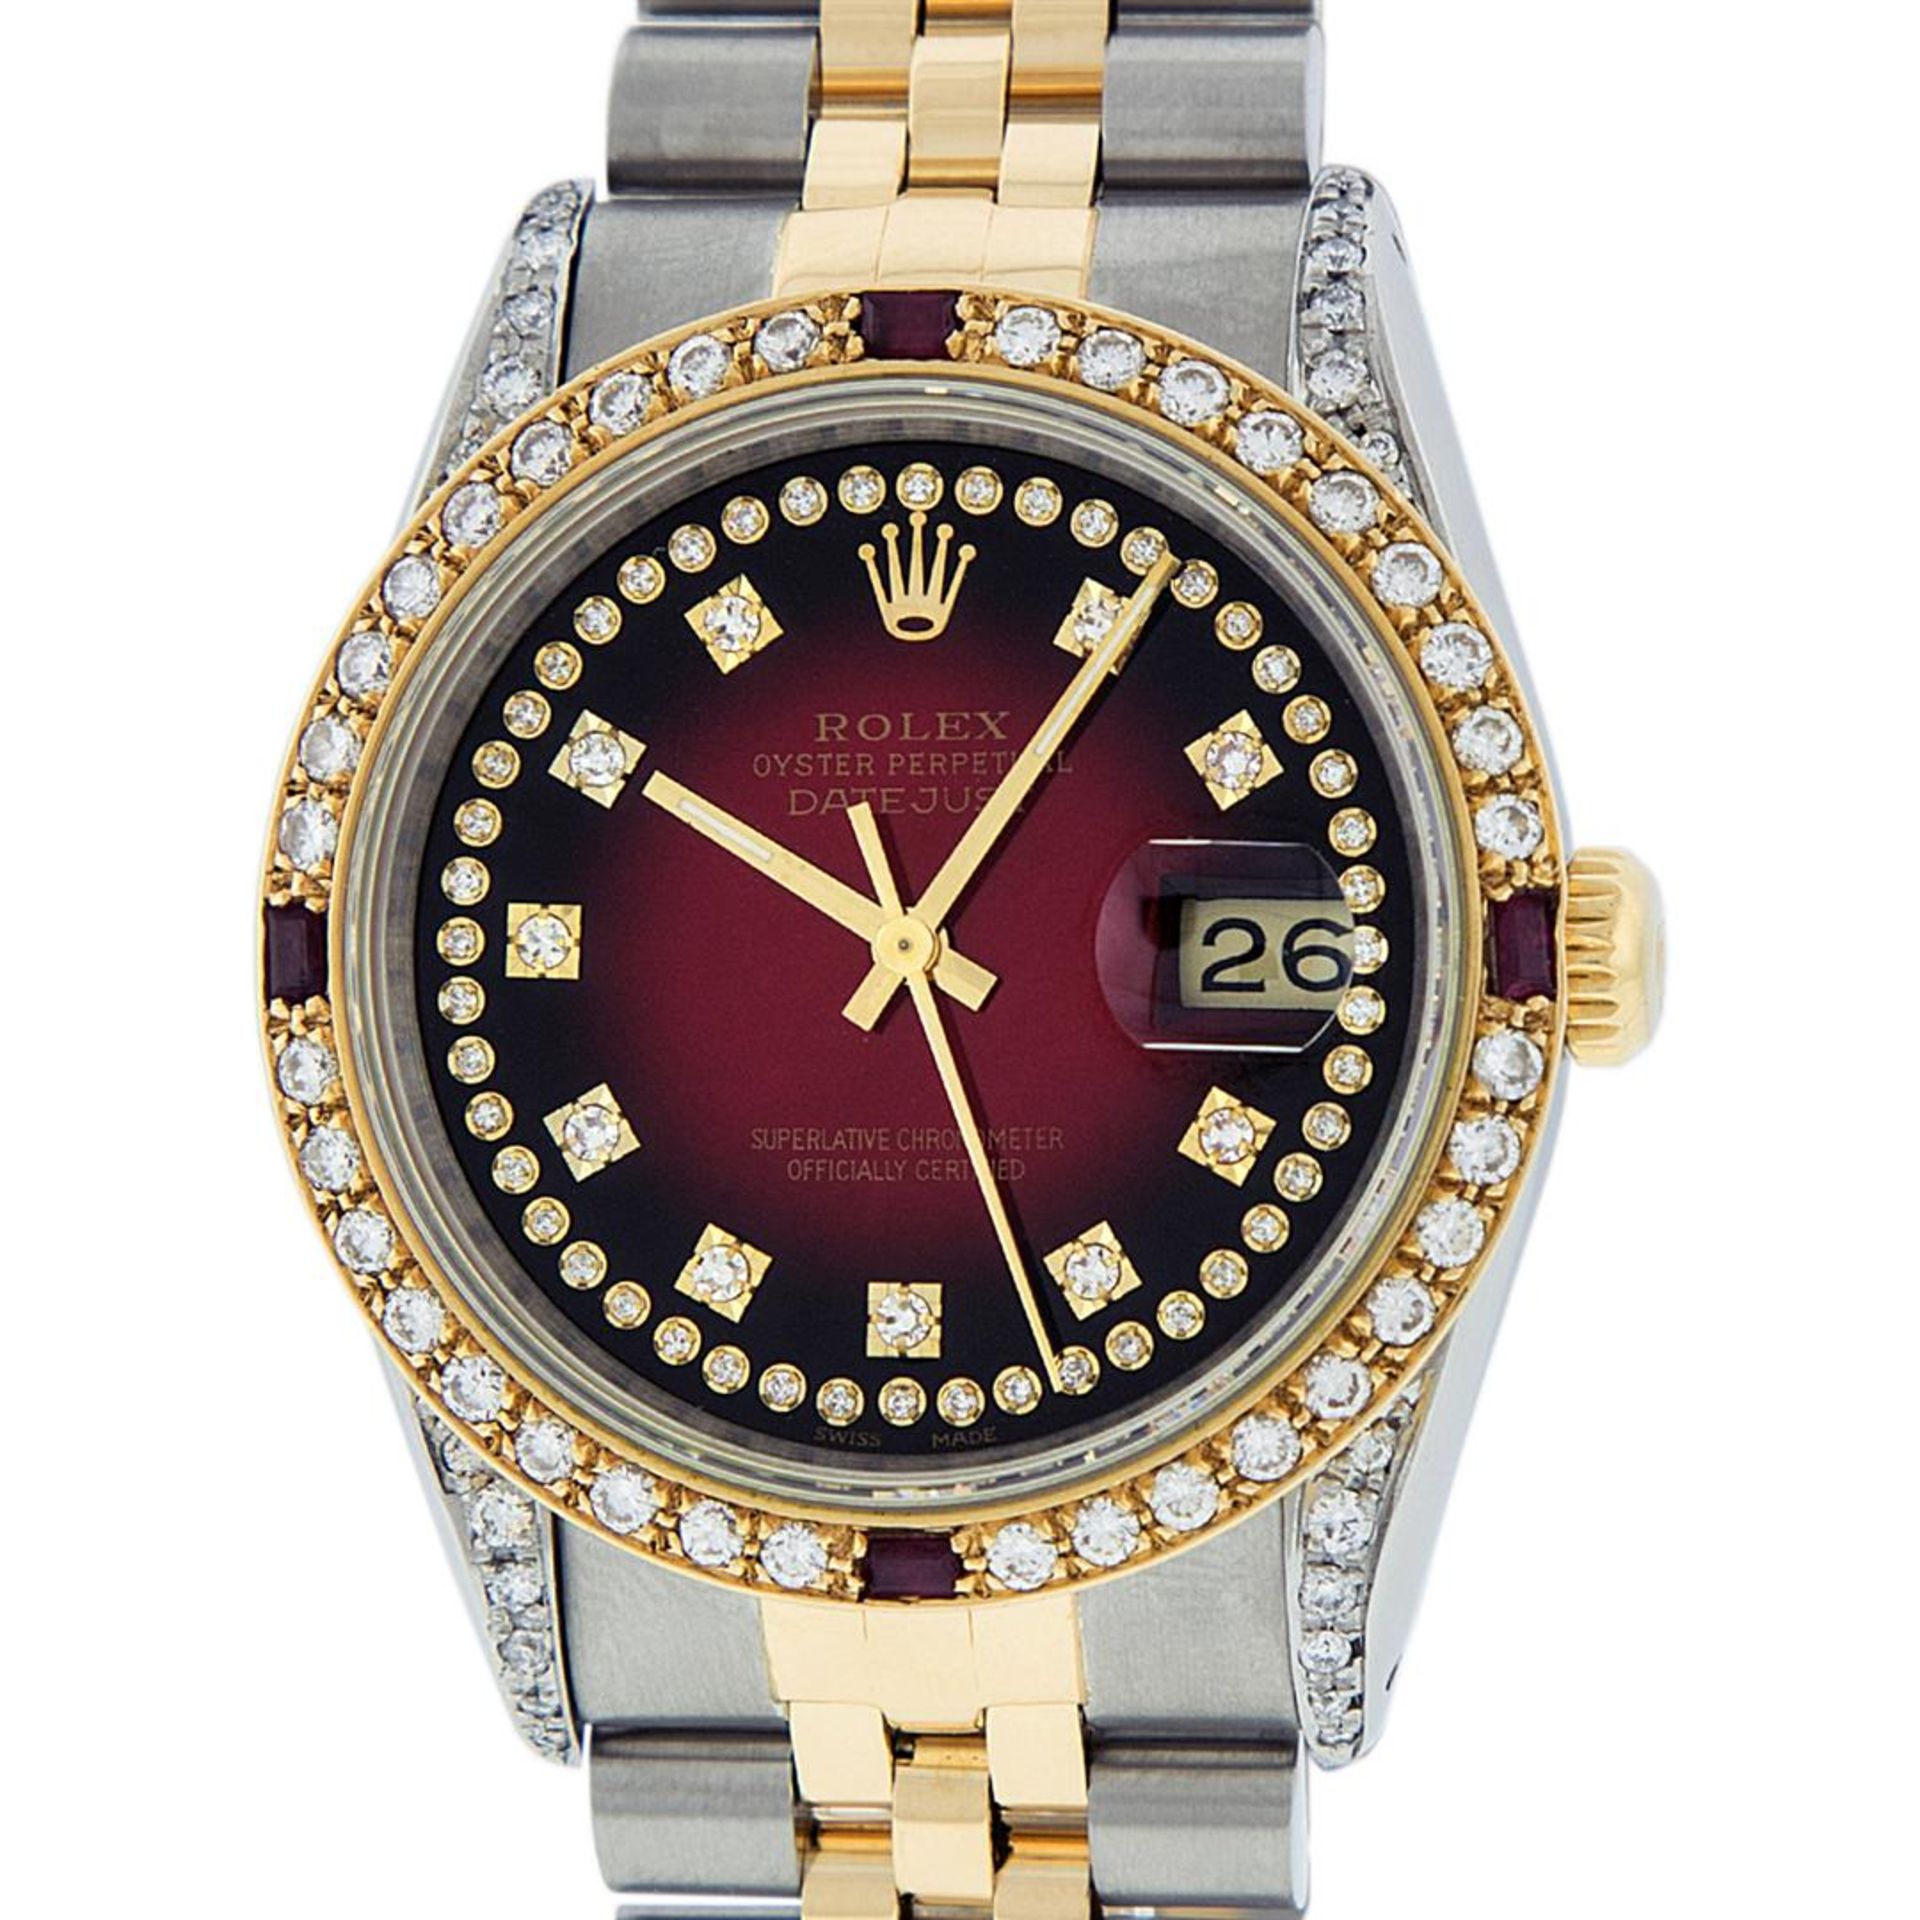 Rolex Mens 2 Tone Lugs Red Vignette Diamond String & Ruby Datejust Wristwatch - Image 3 of 9